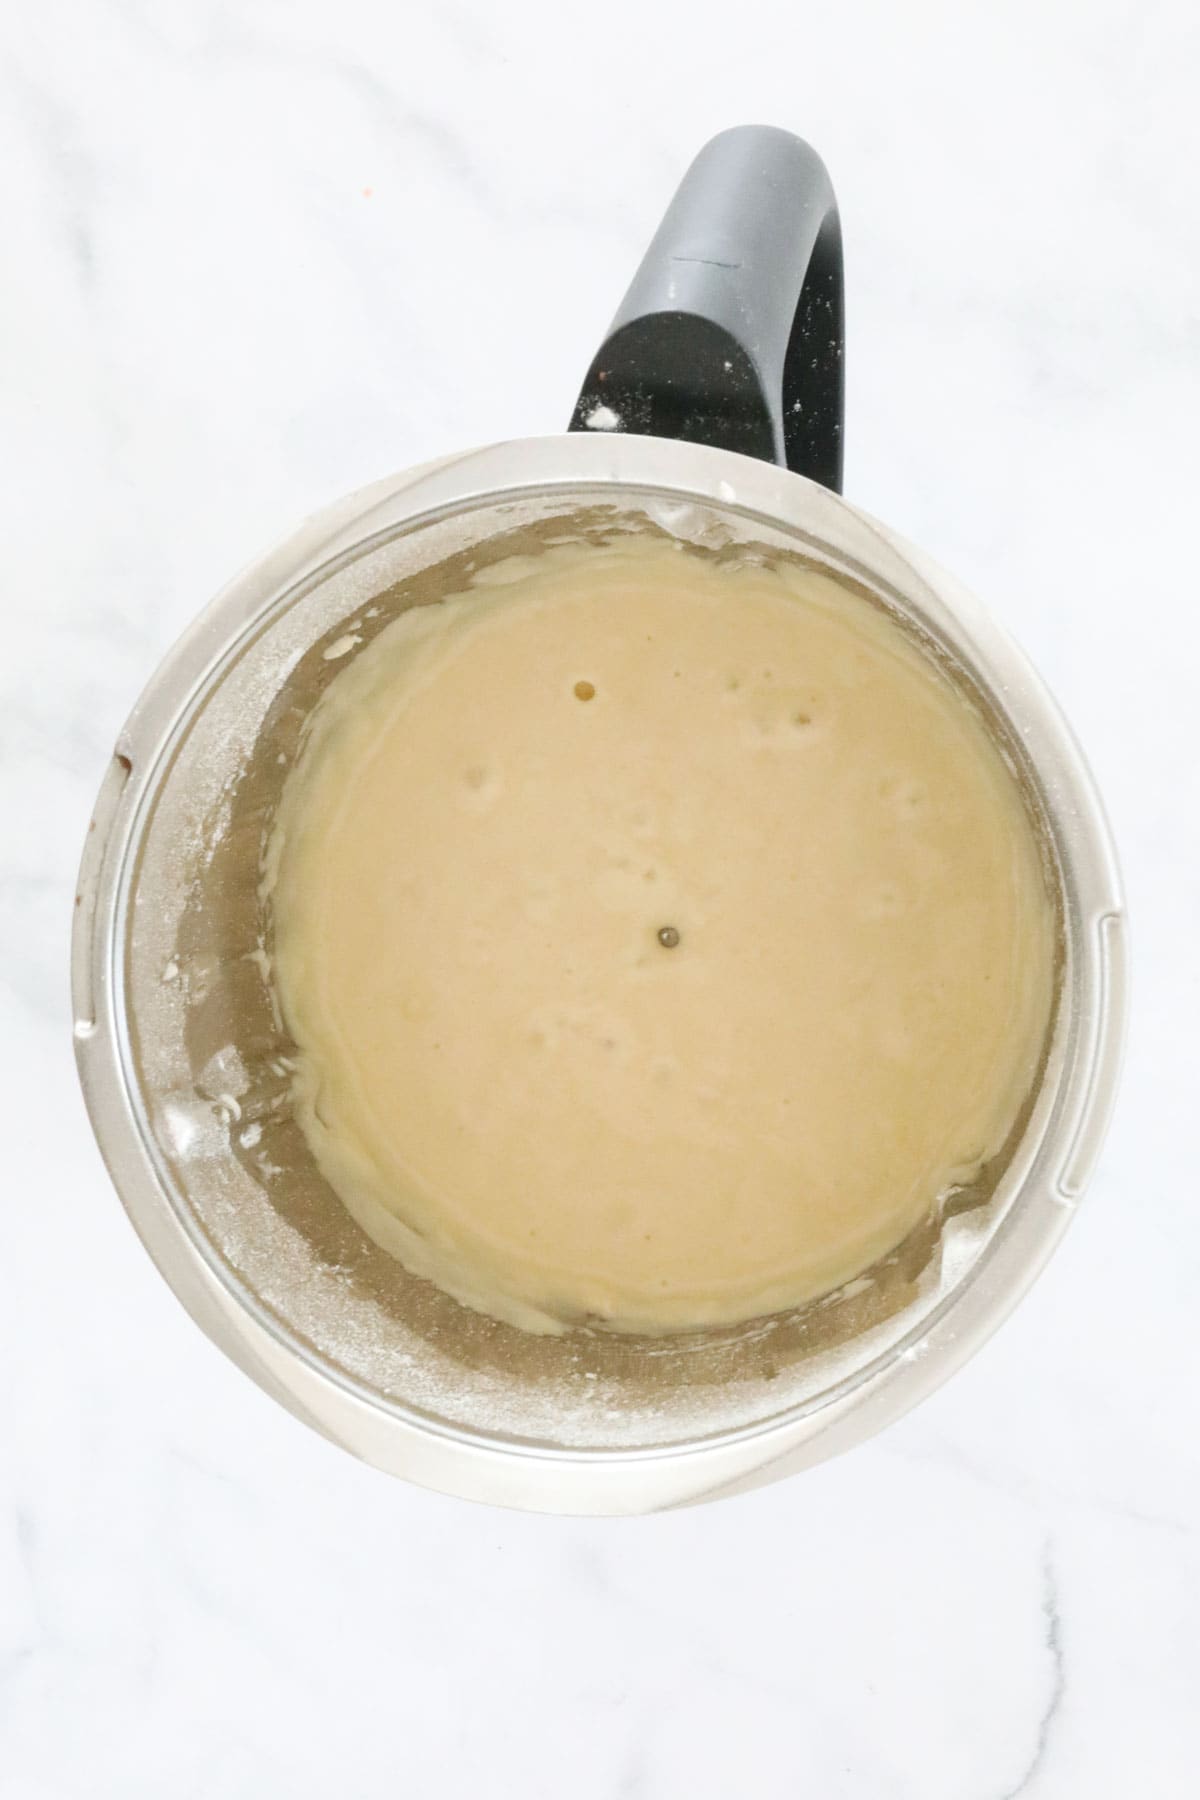 Basic batter in a Thermomix. 